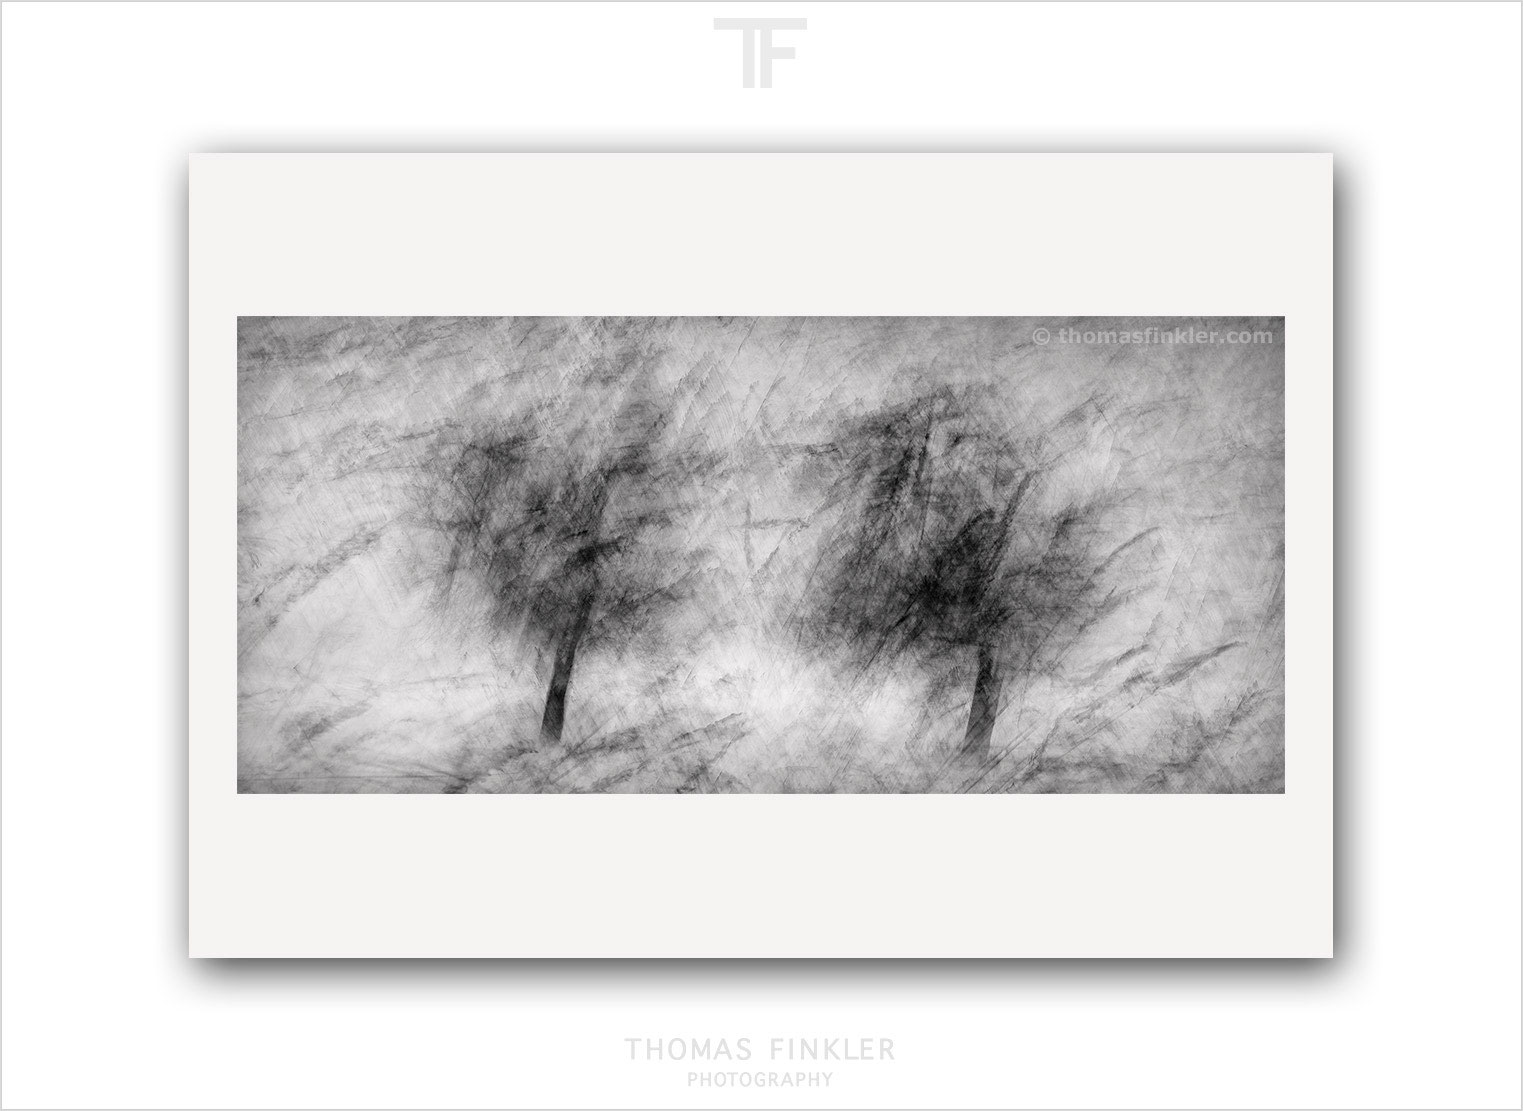 Gallery Monochrome | Blurry Trees - Thomas Finkler Photography